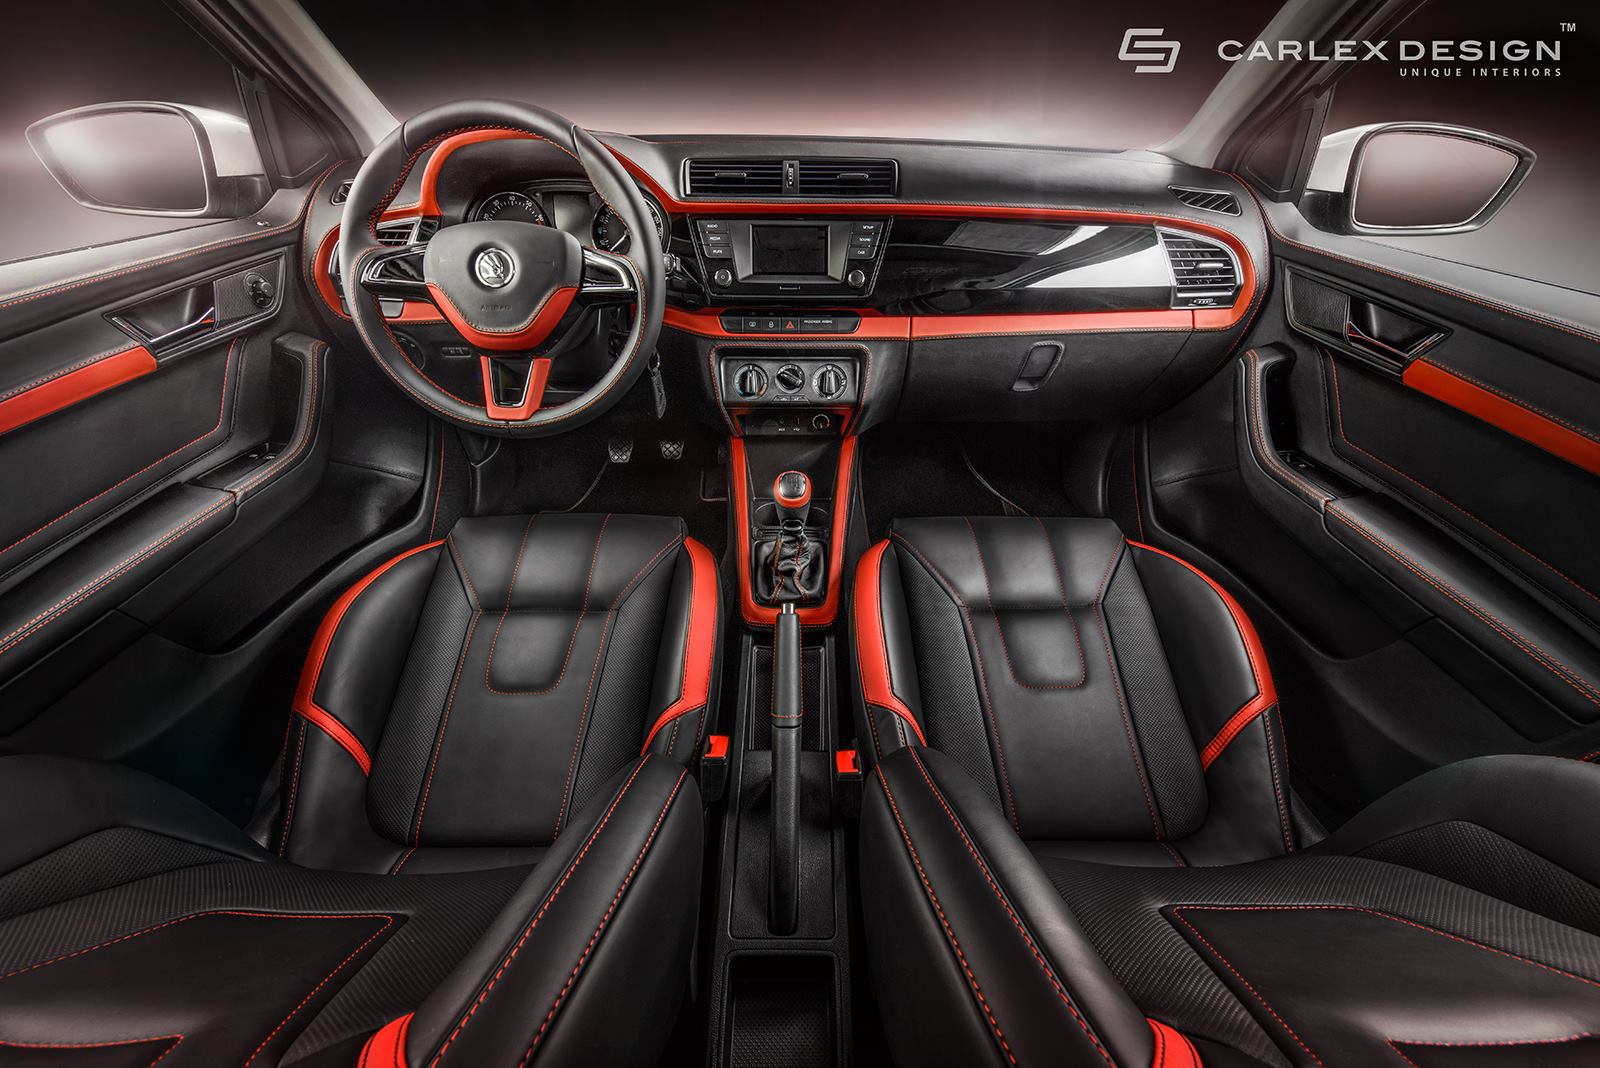 Skoda Fabia Gets The Most Luxurious Interior Ever From